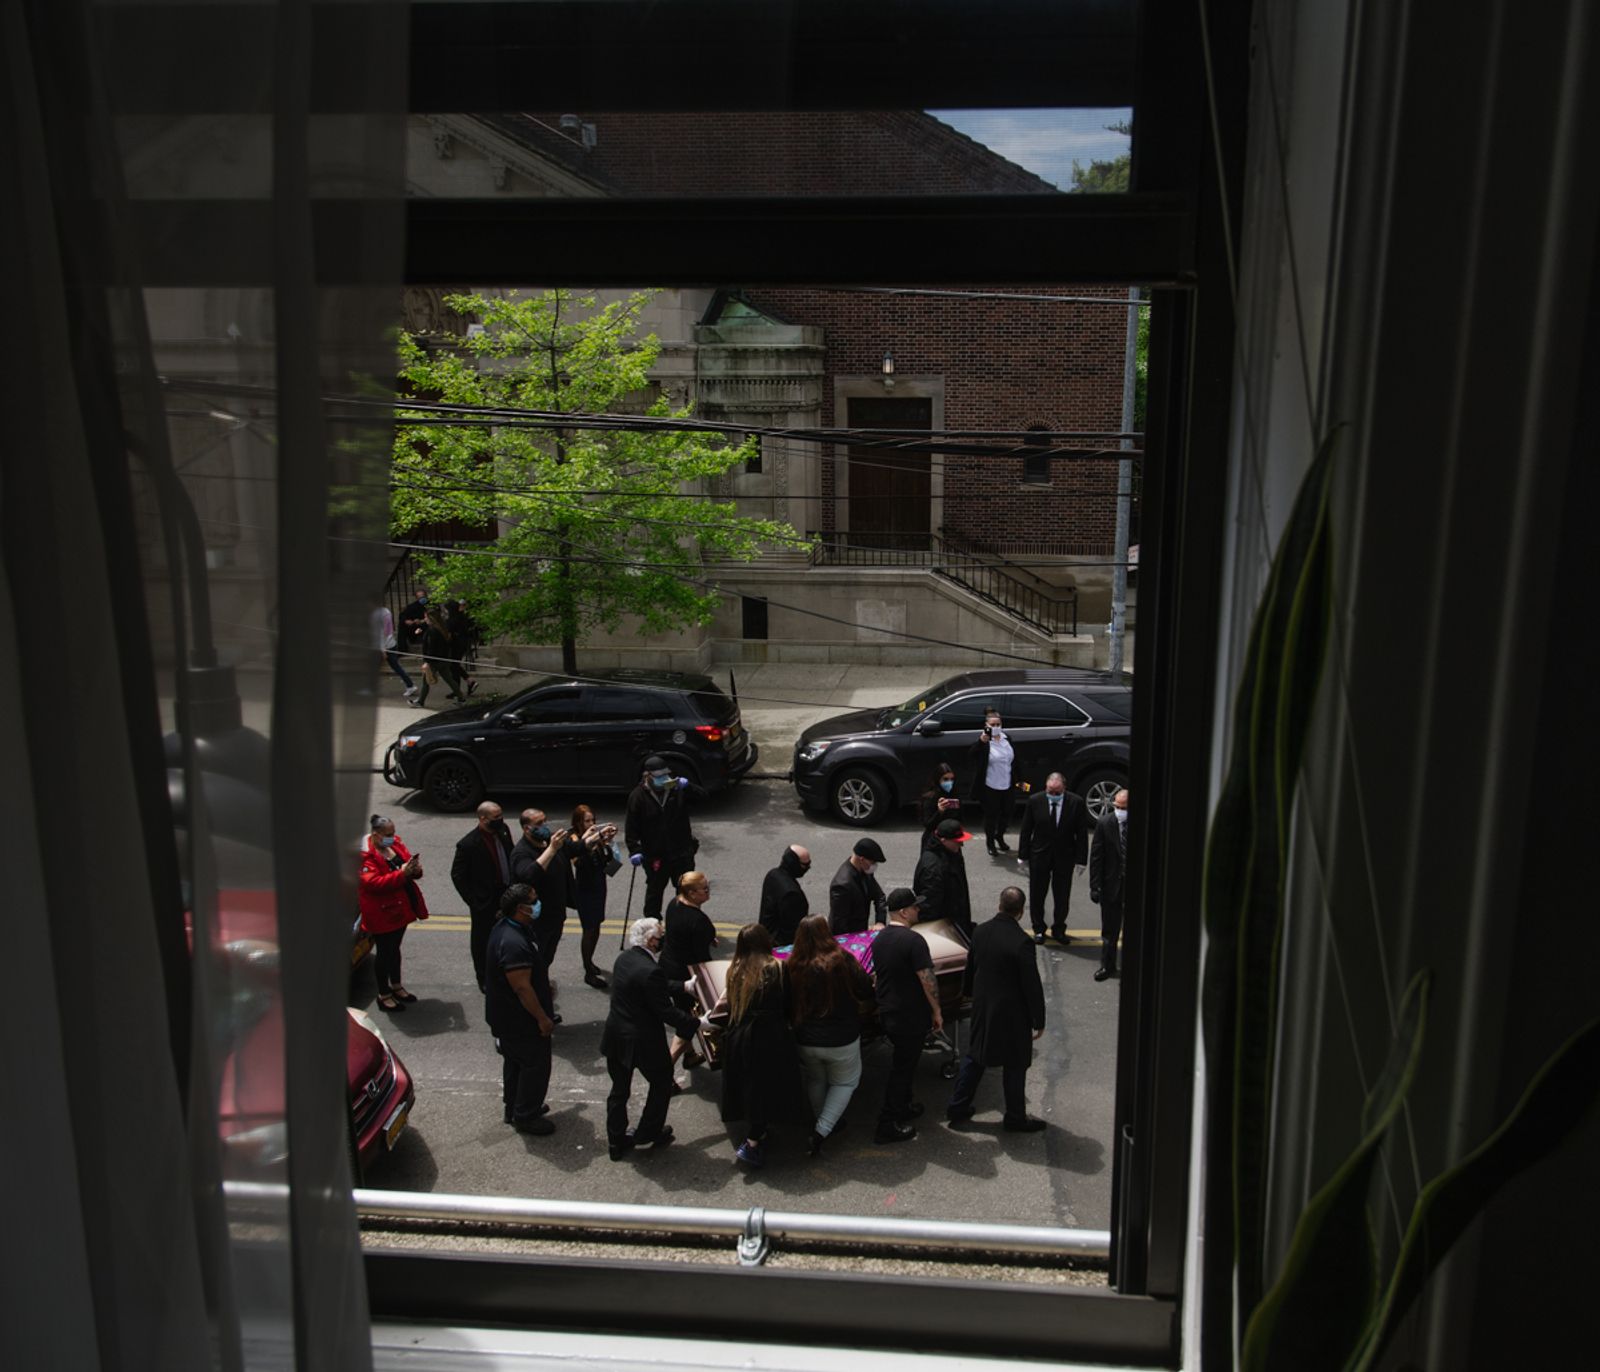 © Gili Benita - A funeral held in the street out side of the window from the apartment, Ridgewood, NYC, May 14th 2020.